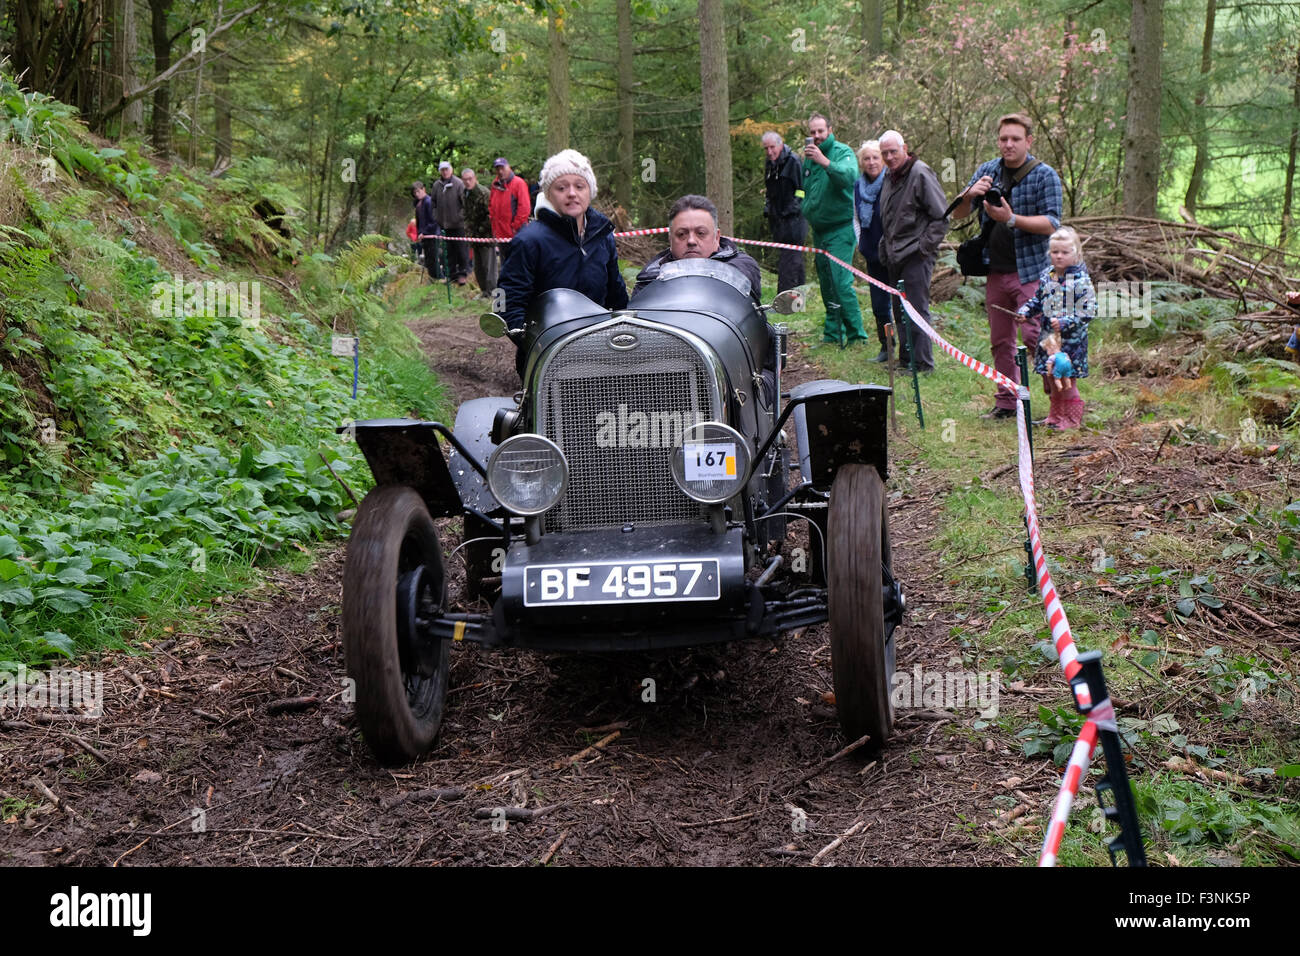 New Radnor, Powys, Wales - Saturday 10th October 2015 - The Vintage Sports Car Club ( VSCC ) hill climb trial challenge on The Smatcher a steep wooded hill just outside New Radnor. This Welsh Trial has been running since 1939. Competitors score points the further they drive up the steep hill with 25 points being awarded for reaching the top. The passengers act as 'bouncers' who bounce to help the car grip on the steep sections. Shown here is a 1930 Ford Model 'A' Special. Stock Photo